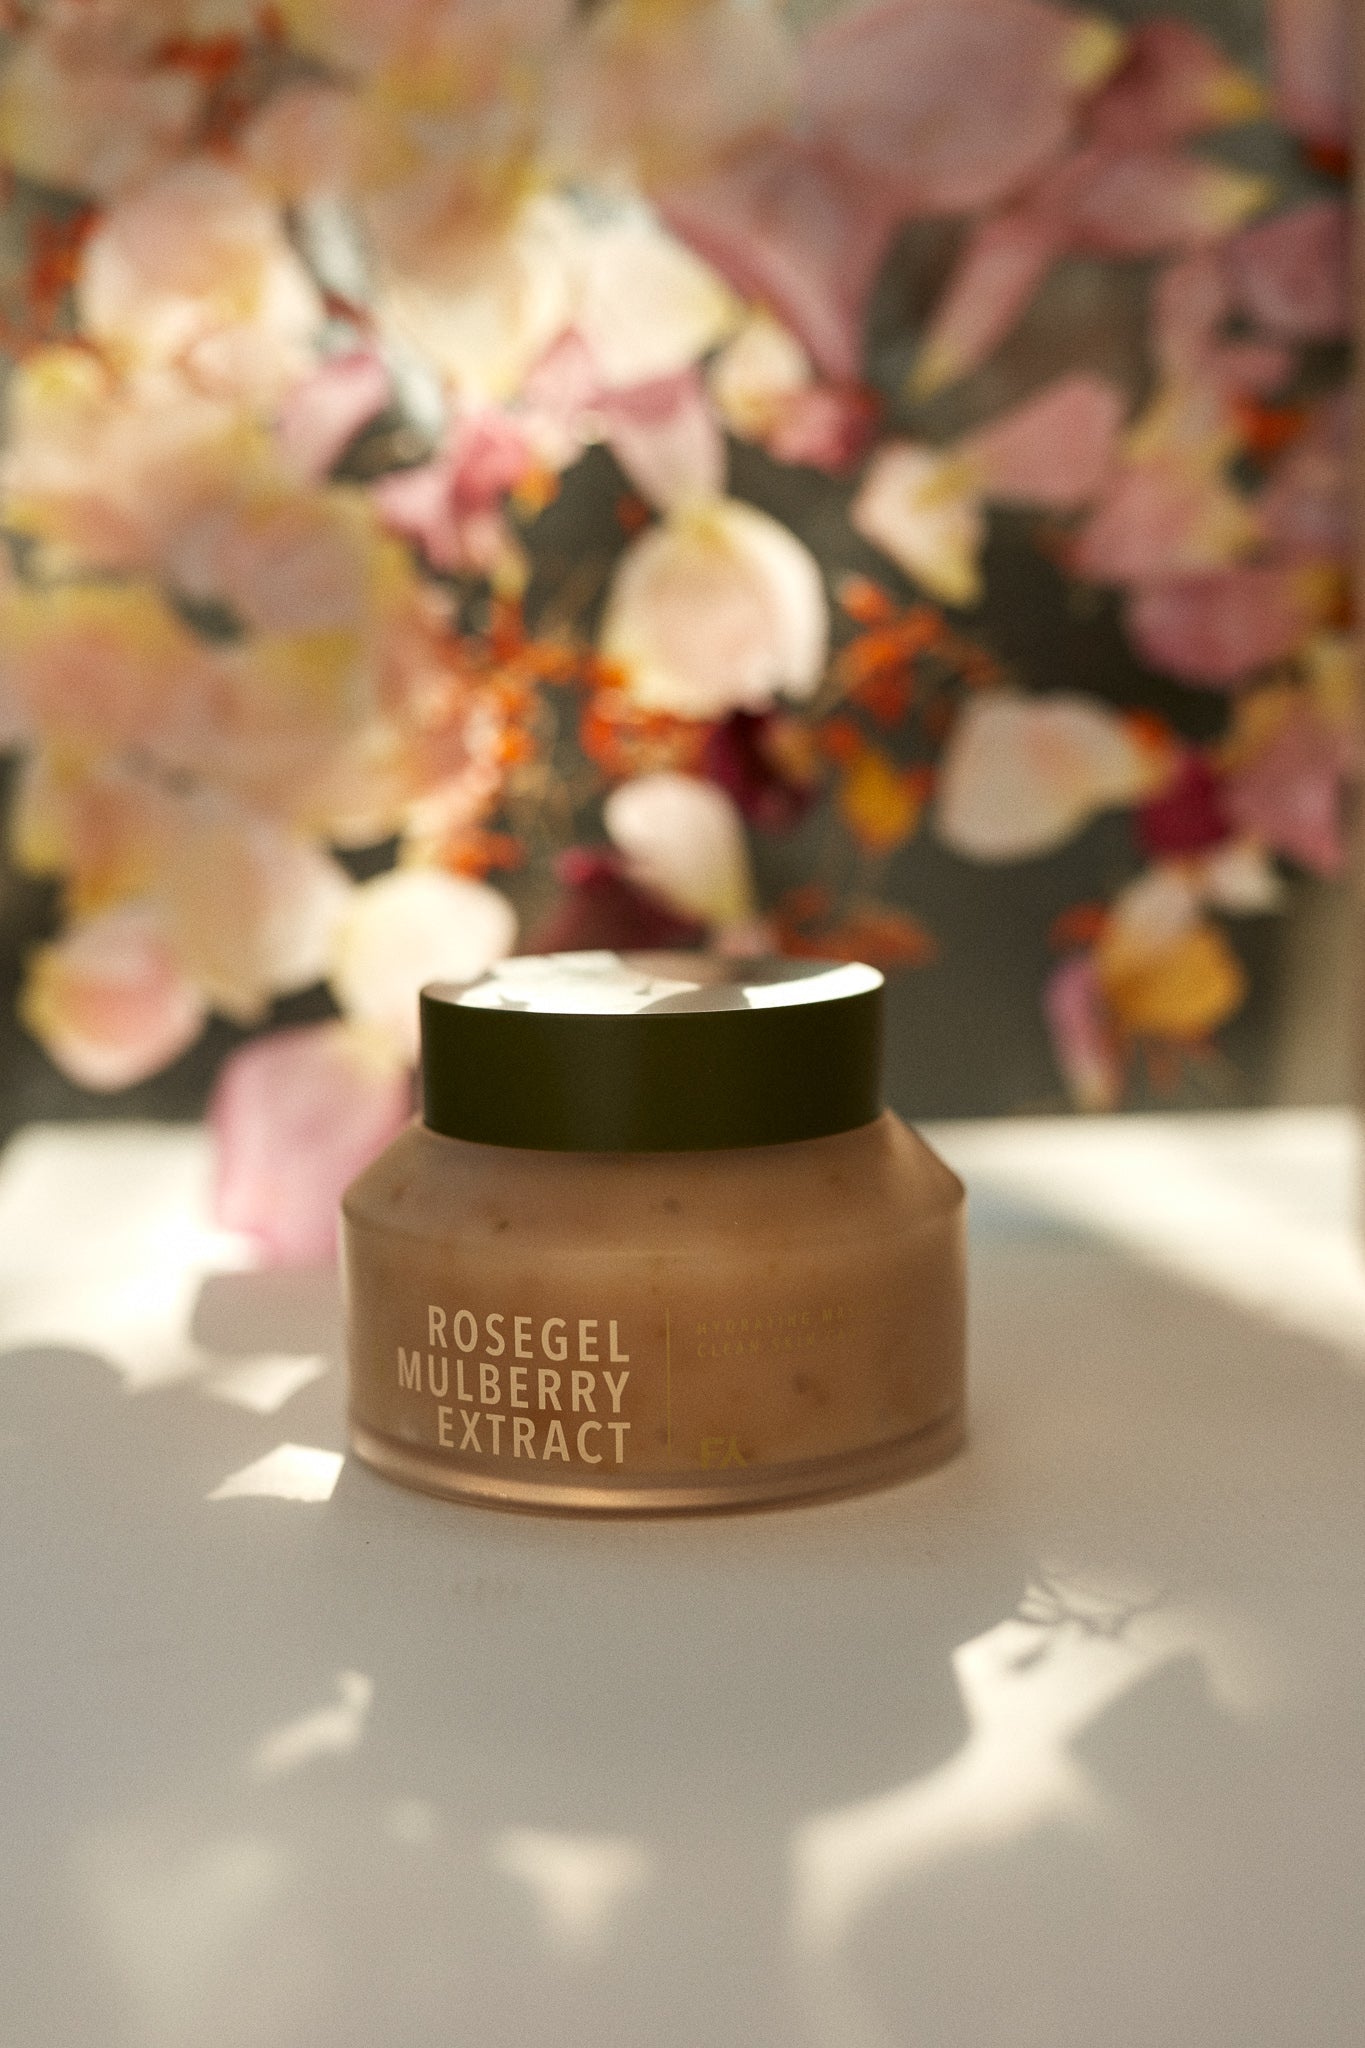 Campaign shot of the Rosegle & Mulberry Extract hydrating face mask by Fields of Yarrow with a flowers background